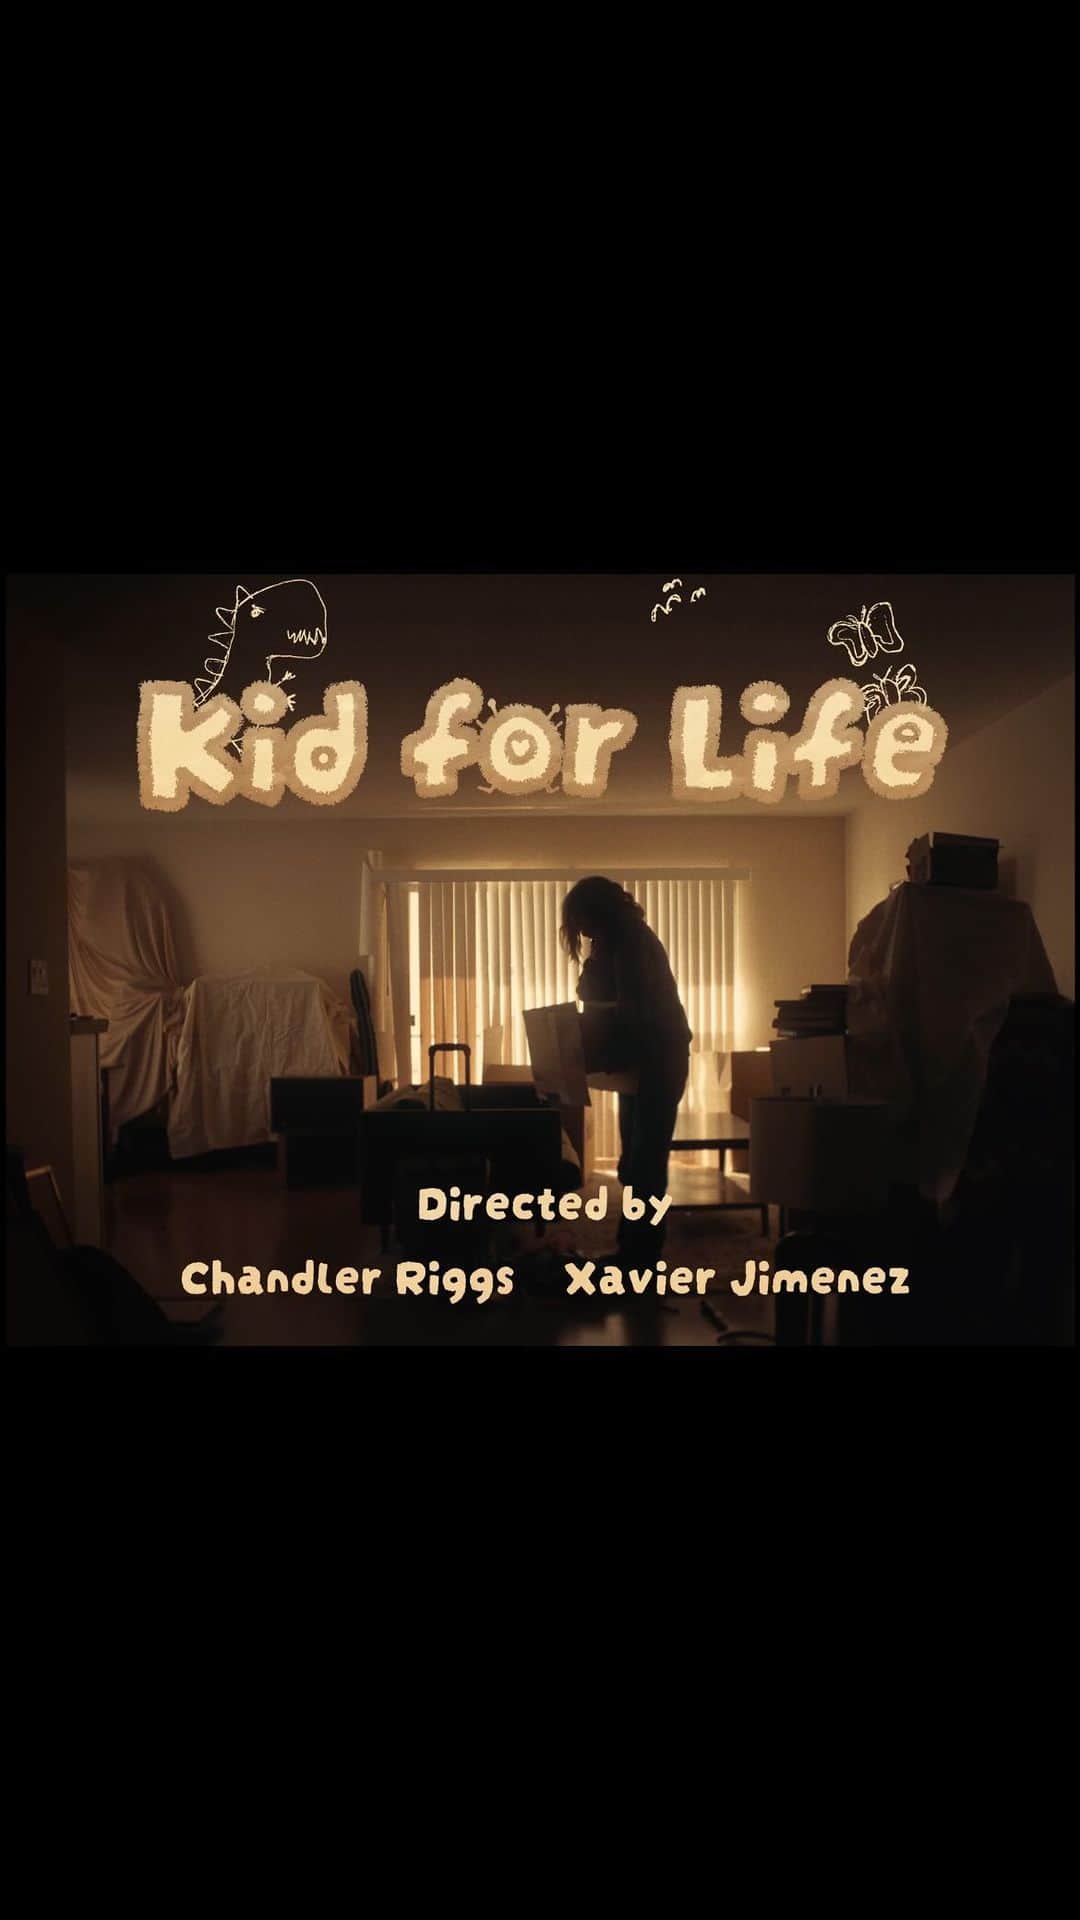 チャンドラー・リッグスのインスタグラム：「today is a HUGE day… my first project as a director is out now!!  KID FOR LIFE by @martathemartian (full music video)  shot, produced & edited by myself & @xavierjimenez1  featuring performances by @martathemartian & @avi_julia  with assistance from @jackie.kay.iii & @danstadnicki title graphics by @missy_mod  ____________  last year my roommate @xavierjimenez1 & i were tired of doing nothing but auditioning & had so many stories we wanted to tell. we realized that the only thing stopping us from just doing it was knowing that we had to commit 100% of our time and energy - so i decided to quit streaming & we formed a production company. since then we’ve been building out sets of high quality cameras, amazing lights, beautiful lenses (some being vintage lenses from the 40s and 50s, rehousing them ourselves to fit modern cameras) & other awesome film equipment *and* learning how to edit, color grade & sound engineer to make an all-encompassing production company that does pre-production, production, & post production without renting gear. we’ve played just about every film crew role on our projects so far (to the point where on our upcoming short film i was running sound while operating our b-cam while pulling focus while also directing) & it’s been such a fulfilling learning experience.  since my exit from the walking dead over 5 years ago i keep hearing the question “so what are you doing now?”, and for the longest time all i could say is that i was auditioning for new stuff - and i wasn’t proud that i didn’t have a better answer. i was fortunate enough to do some amazing projects here & there over the years, but none of them lasted longer than a couple months.  now i do have an answer i’m proud of! i’m constantly creating my own projects and telling stories i want to tell, and i get to do it with some of my best friends. so being able to visually tell a story like this music video - wanting to be a kid again, when everything was easier, feels full circle to how i constantly felt when i was in that limbo-stage.  and don’t worry, i’m still acting. this is just another way for me to be able to create meaningful art that you can watch, feel for & relate to.  enjoy!」